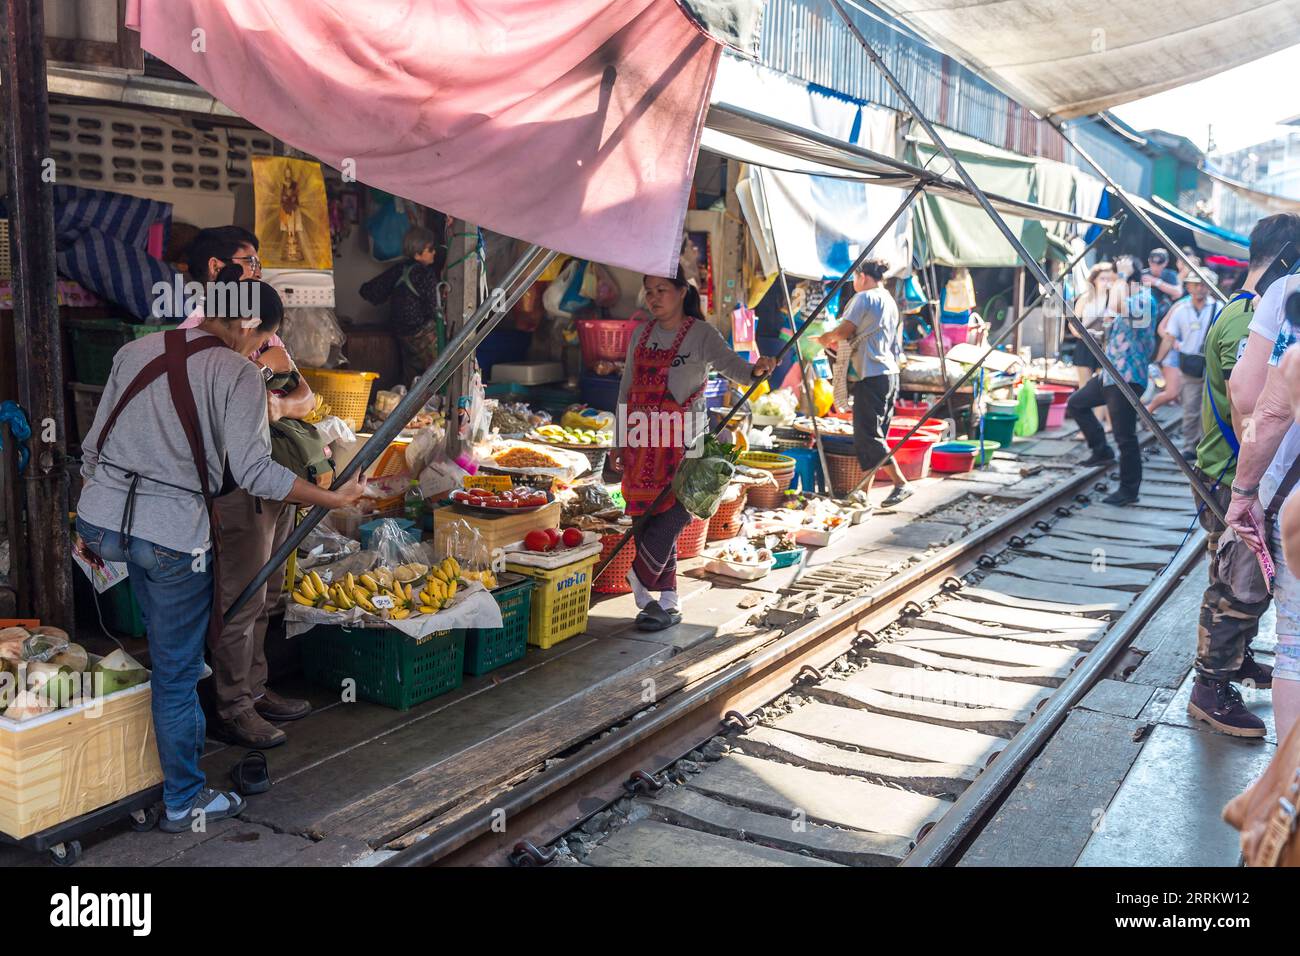 Vendors move their wares and catch up with awnings when a train arrives, selling food on rails, Maeklong Railway market, Talad Rom Hub railroad market, near Bangkok, Samut Songkhram, Thailand, Asia Stock Photo